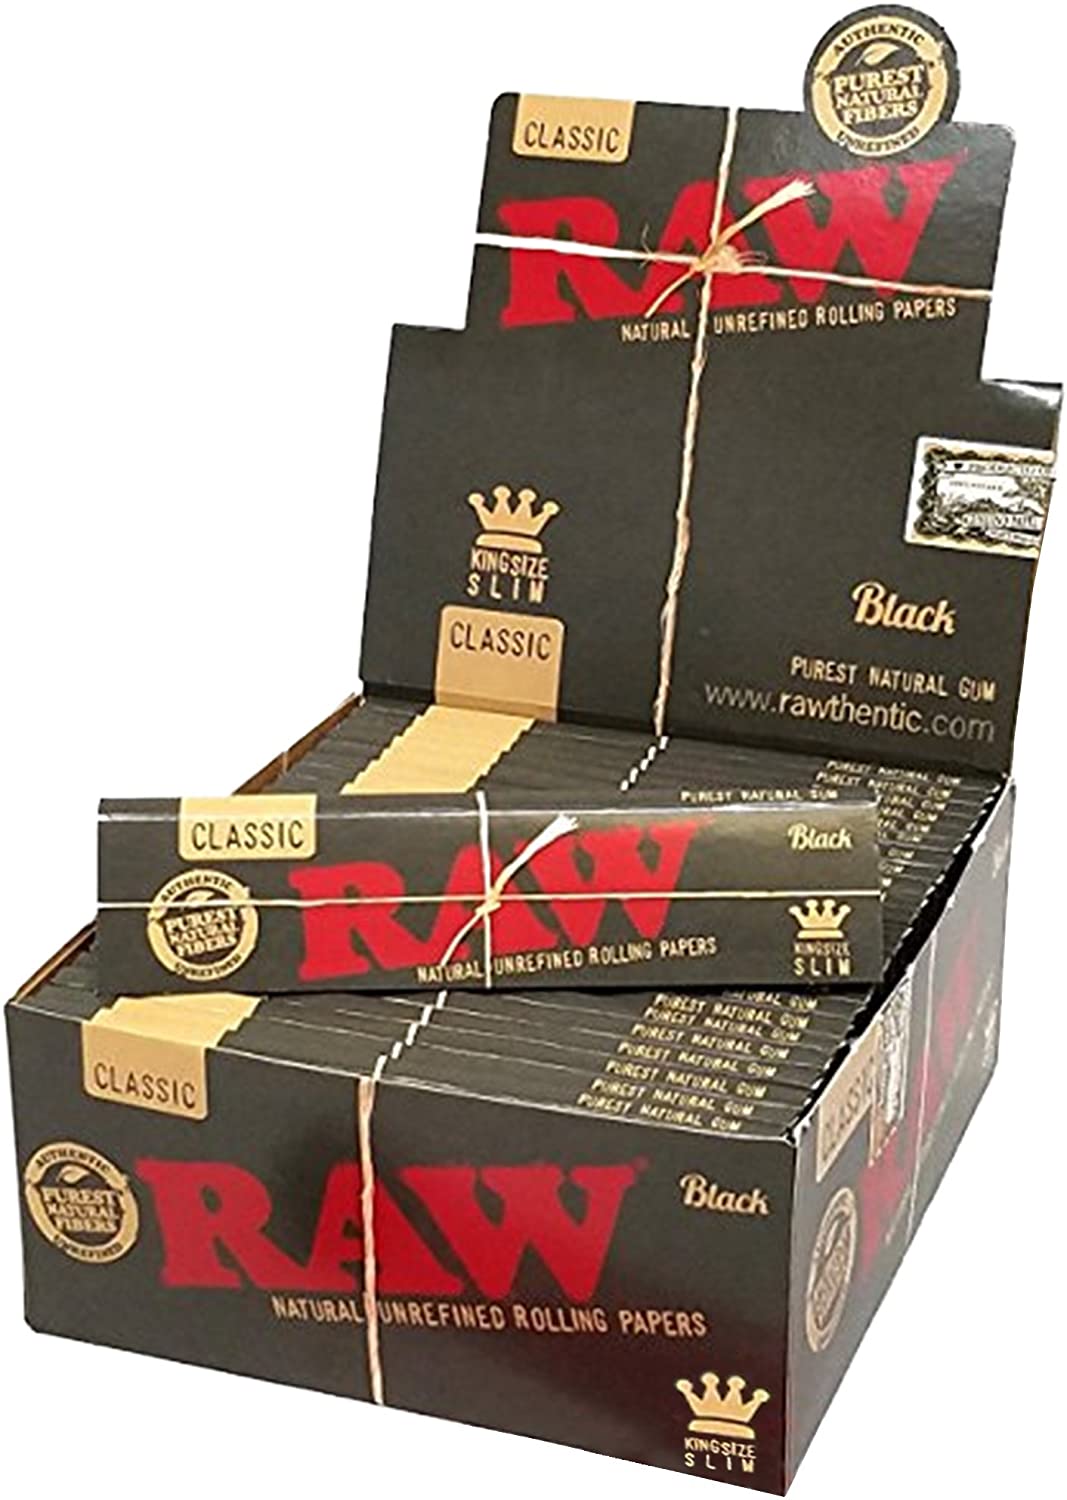 RAW CLASSIC KING SLIM SIZE BLACK ROLLING PAPERS (BOX OF 50)